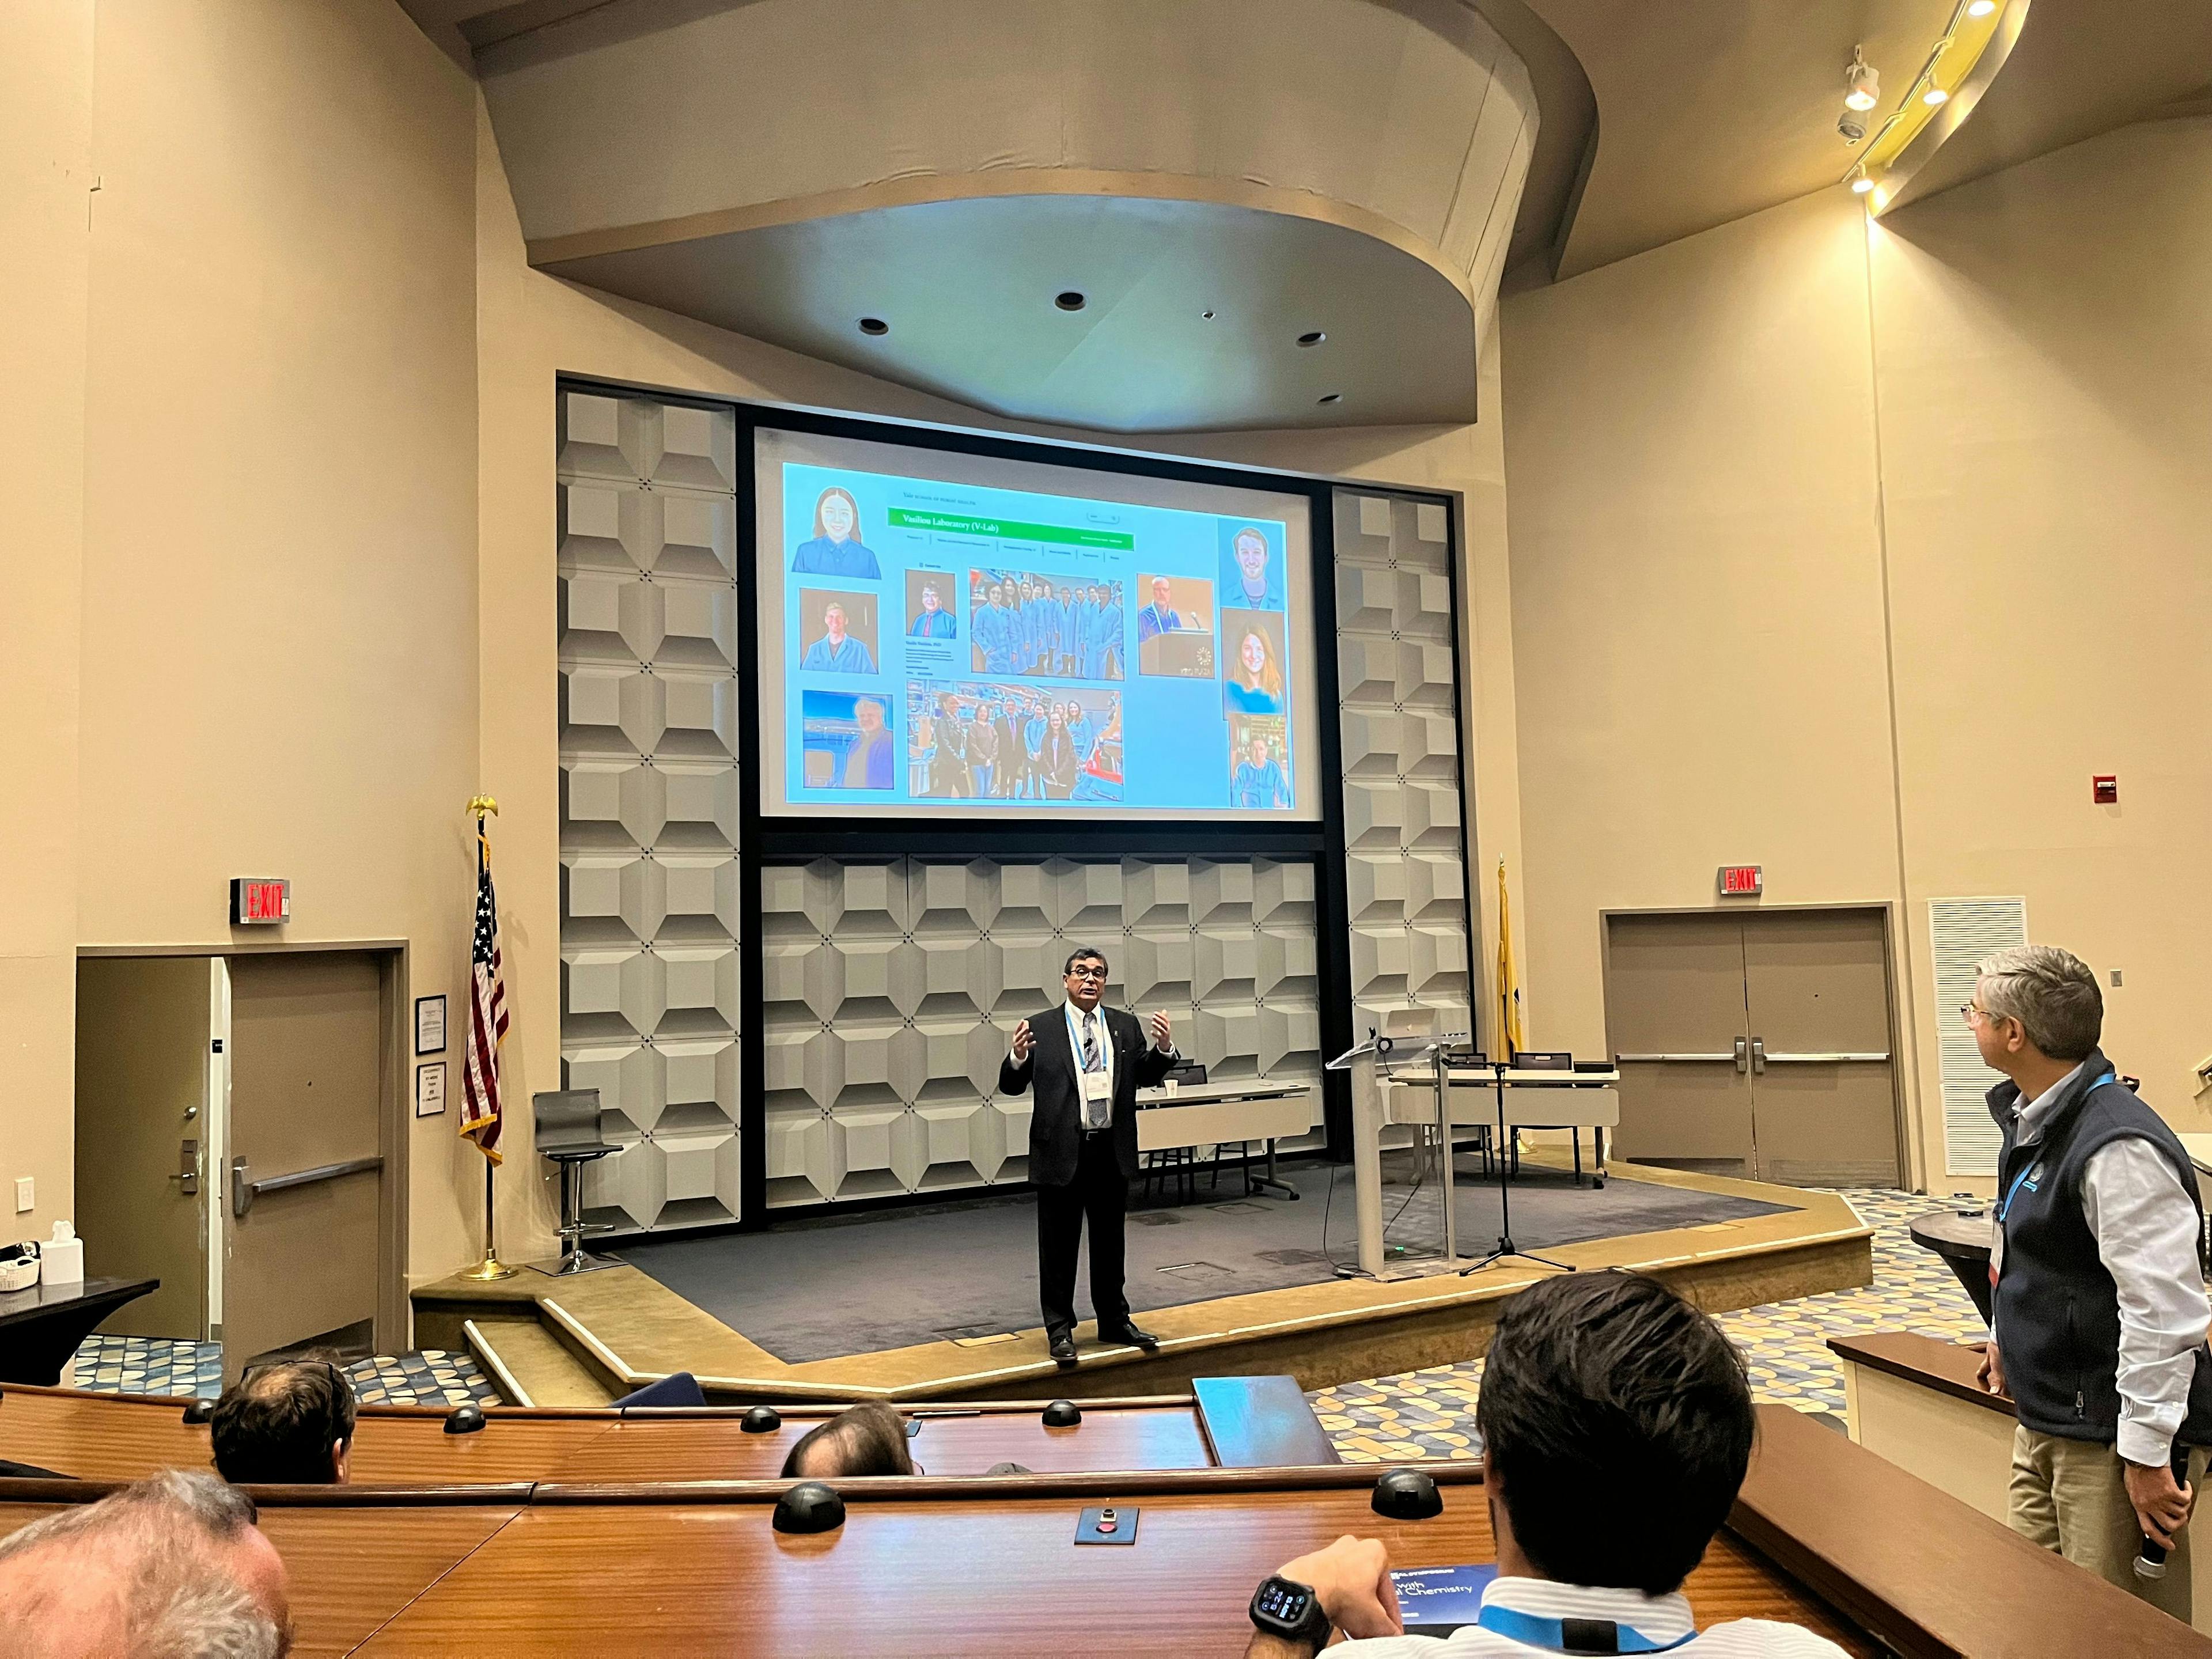 Vasilis Vasilious, chair of the department of Environmental Health Sciences at Yale University, delivering a talk at the Eastern Analytical Symposium in Princeton, New Jersey, on November 14th. | Image Credit: © Caroline Hroncich